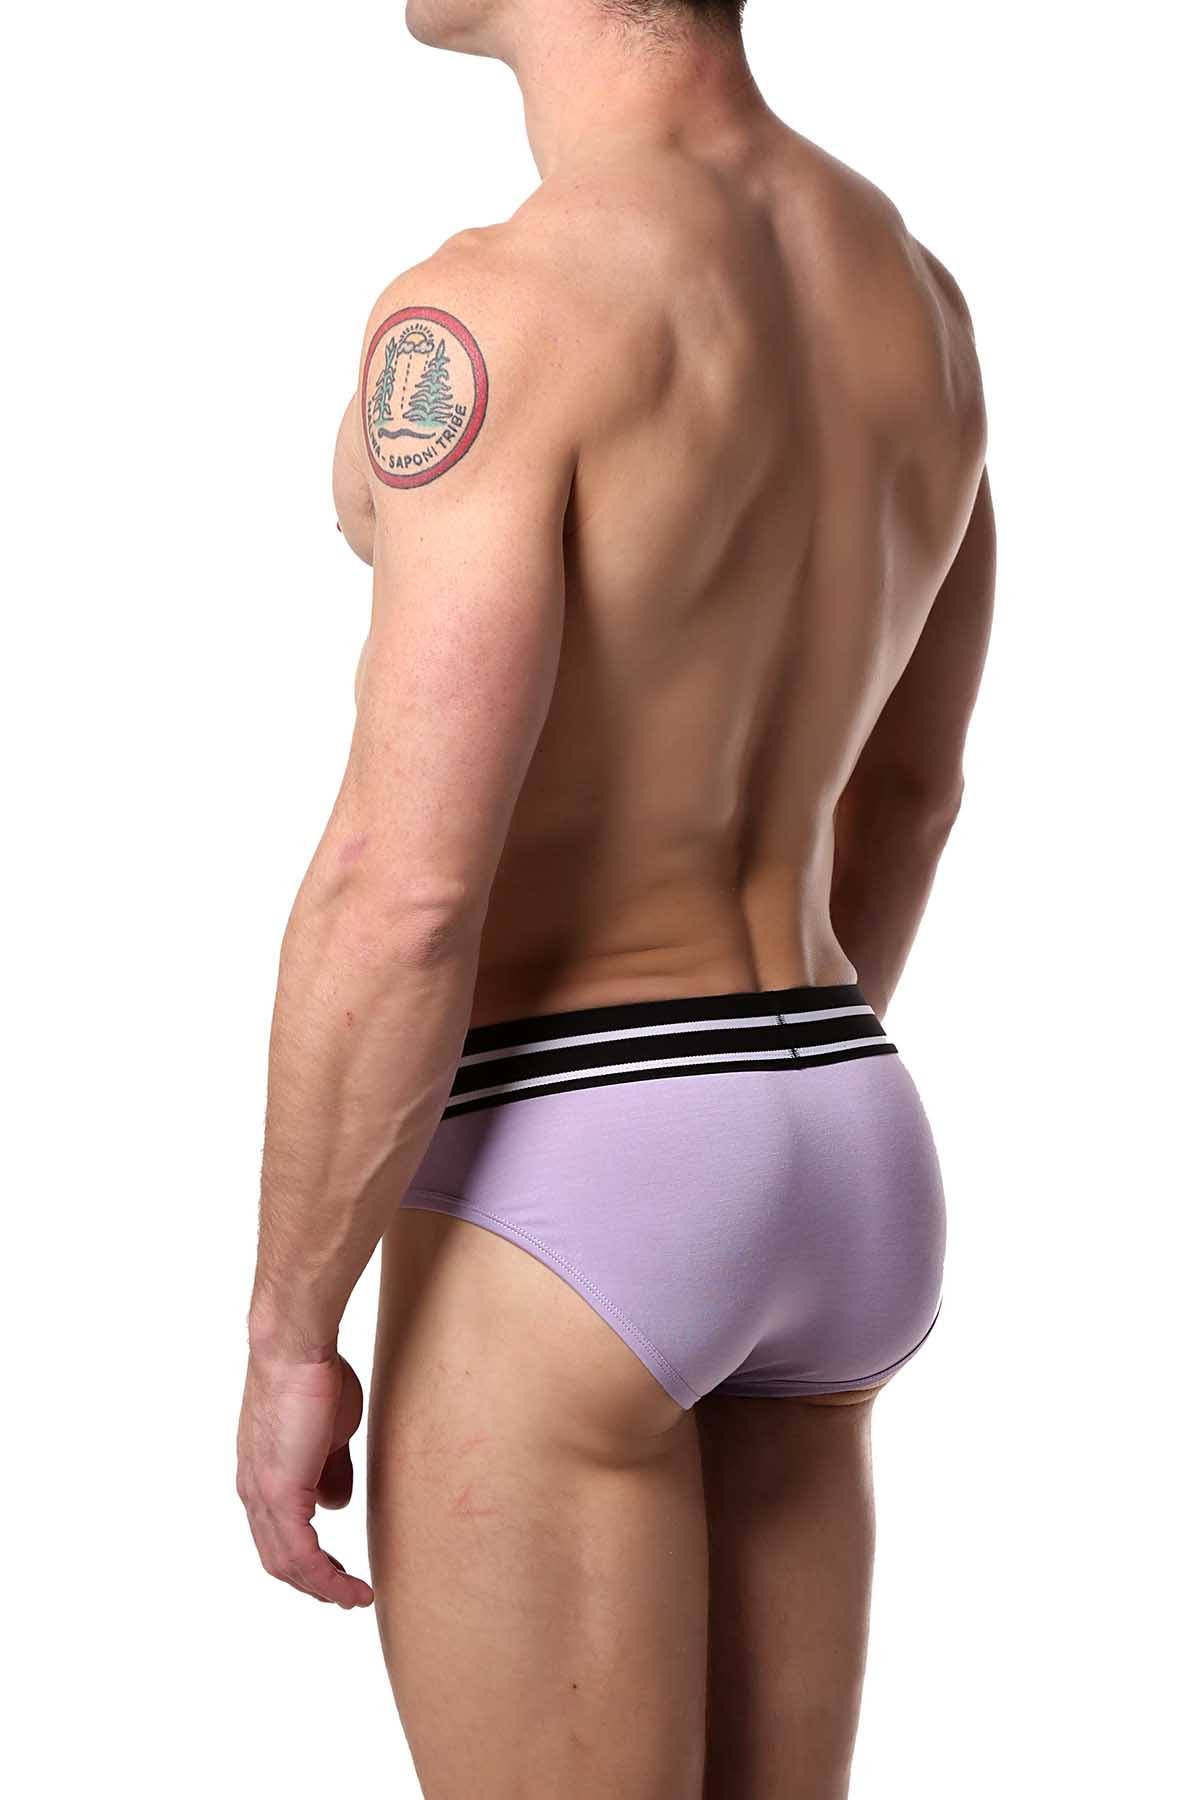 Flyboy Lilac Bamboo Brief